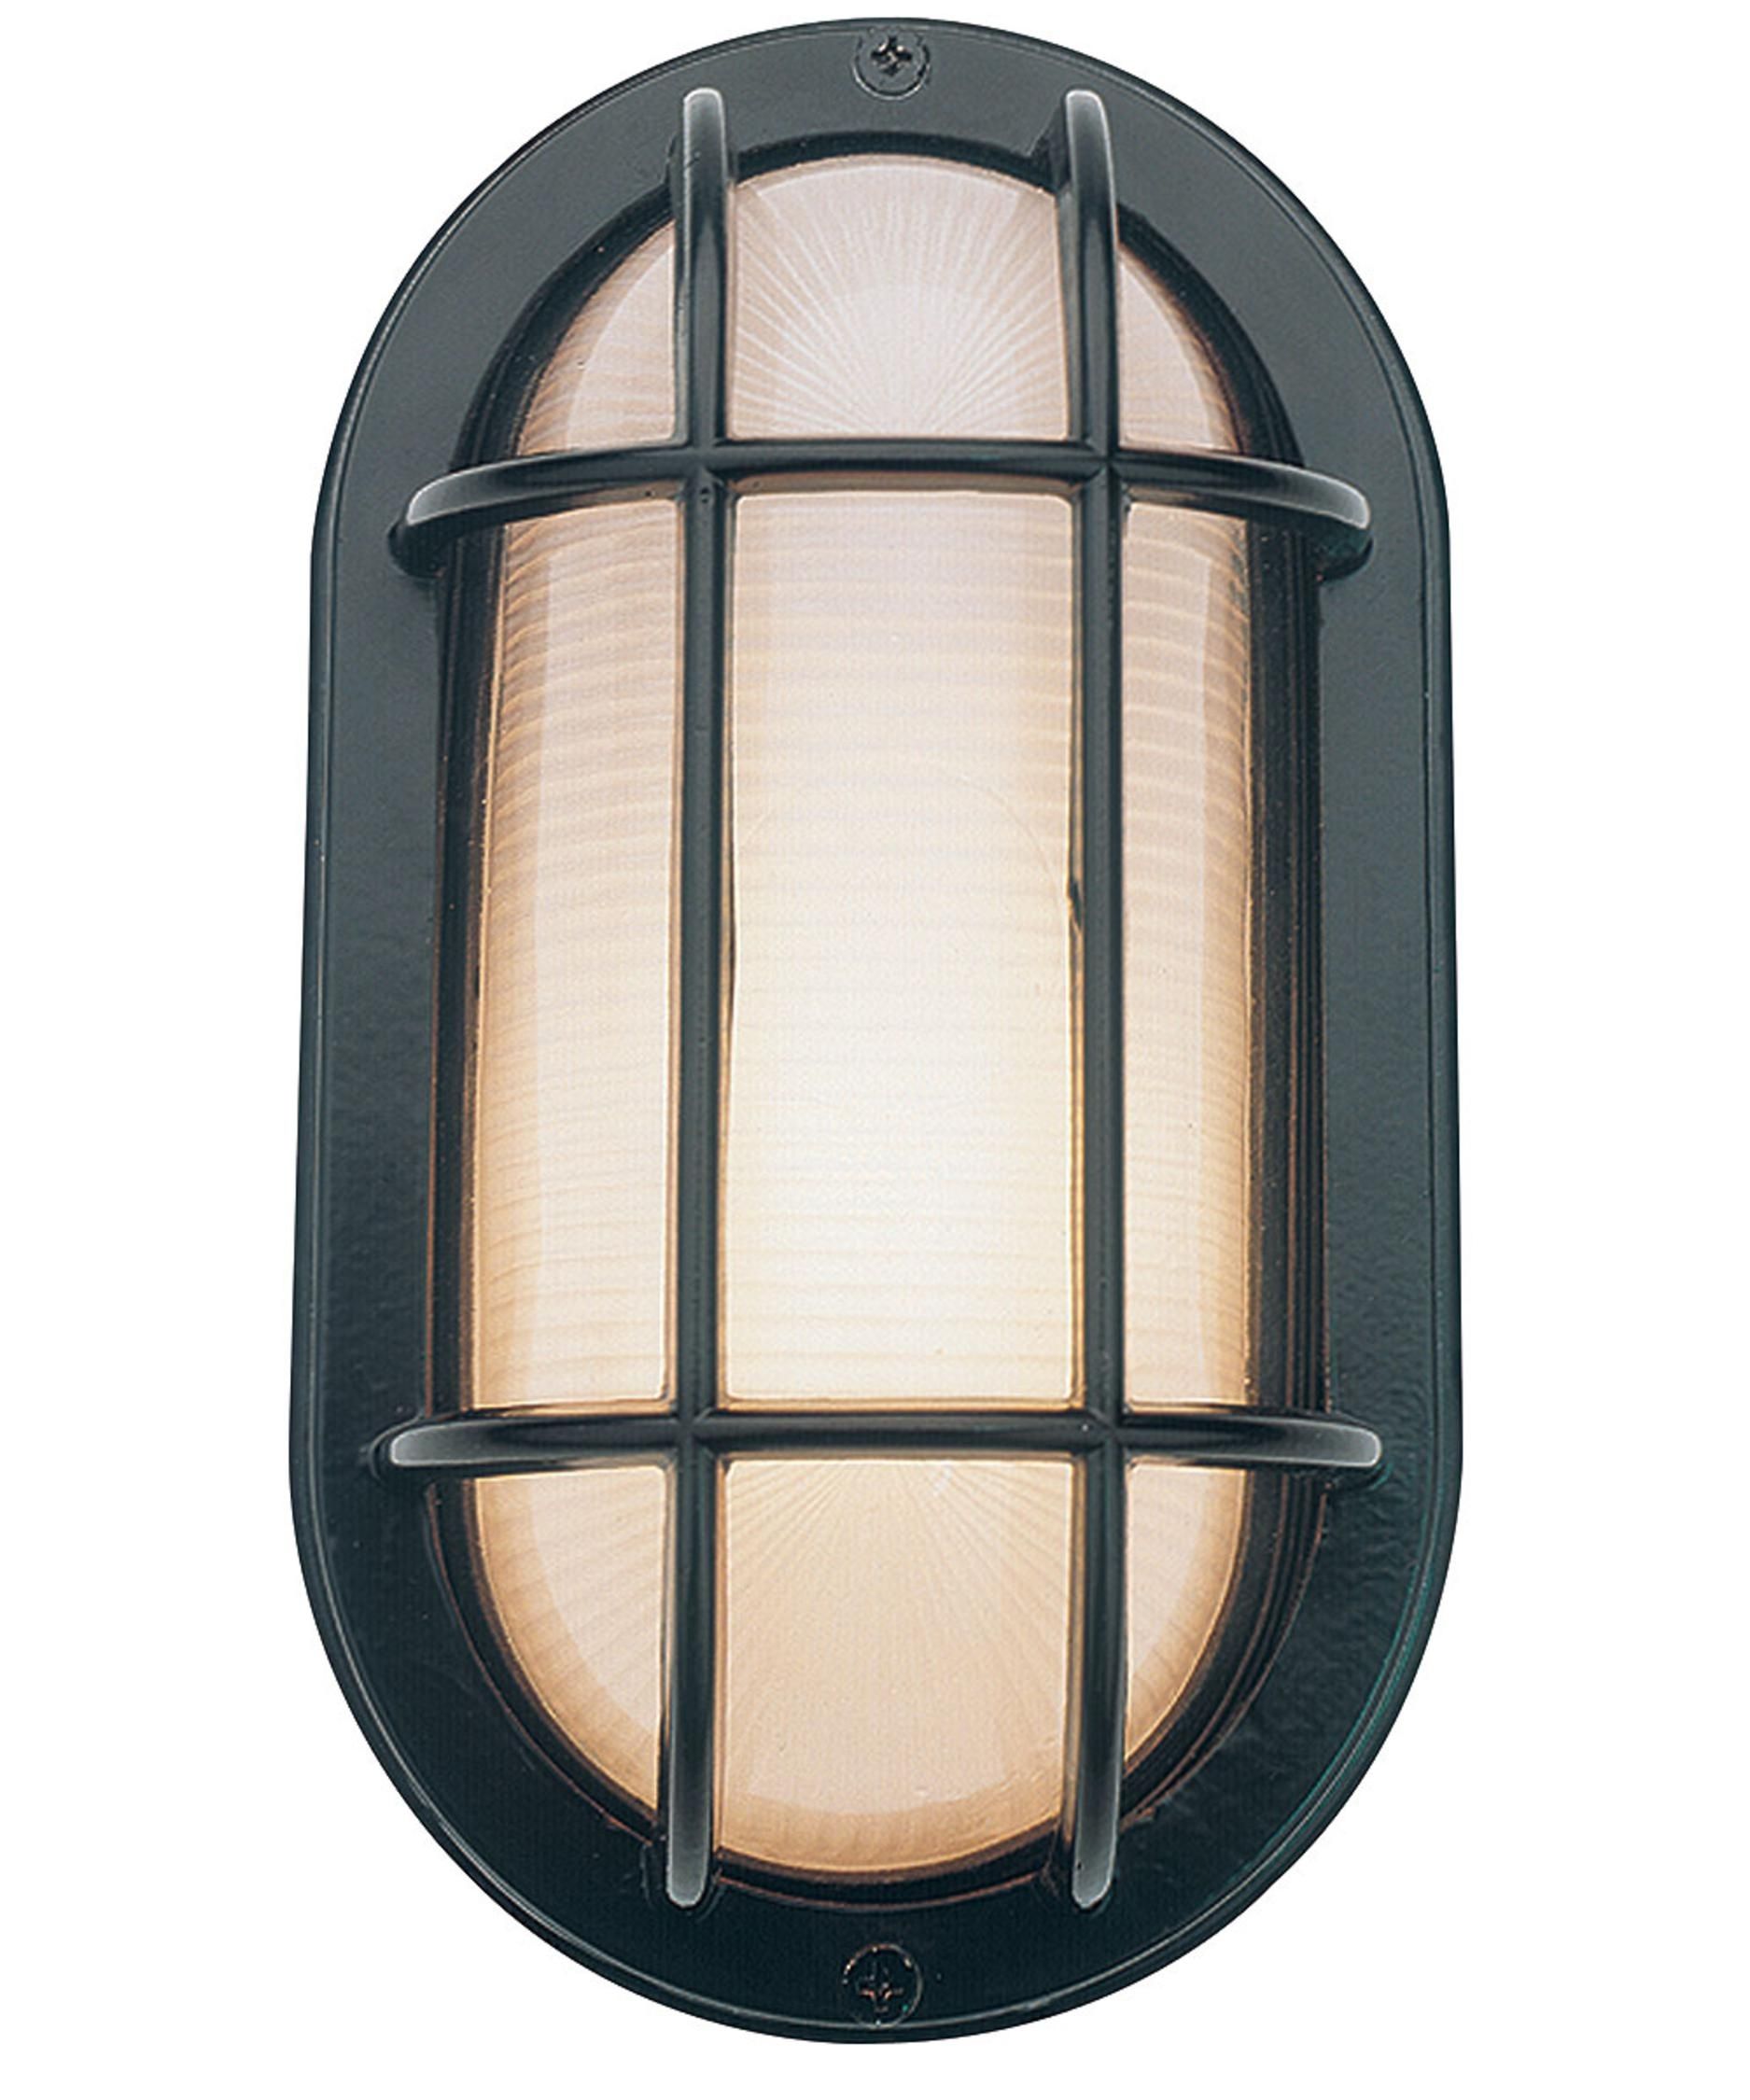 Access Lighting 20290 Nauticus 4 Inch Wide 1 Light Outdoor Wall With Access Lighting Outdoor Wall Sconces (View 9 of 15)